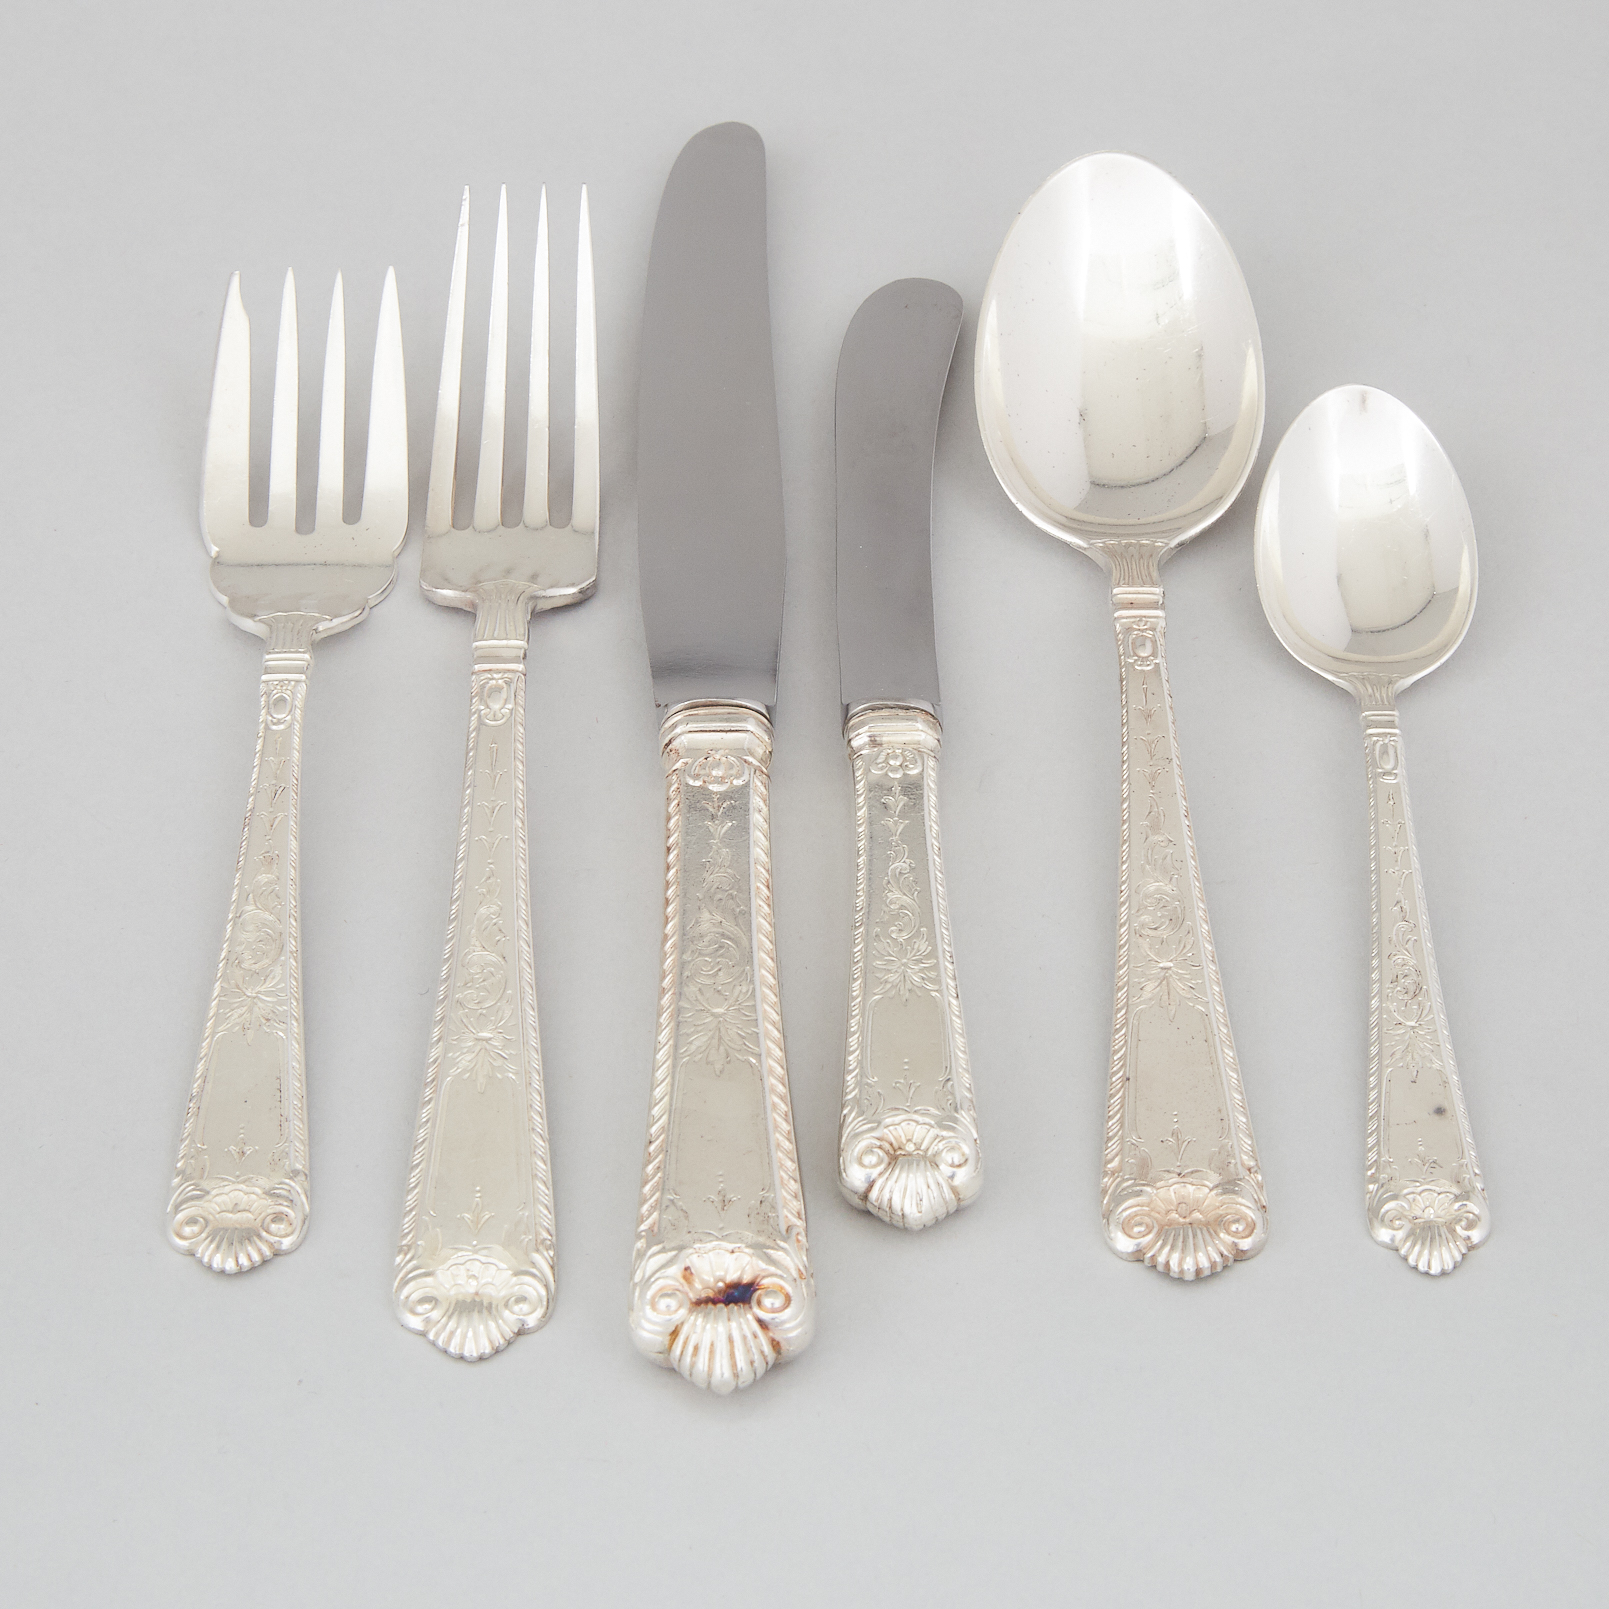 Canadian Silver 'George II Engraved' Pattern Flatware Service, Henry Birks & Sons, Montreal, Que., 20th century